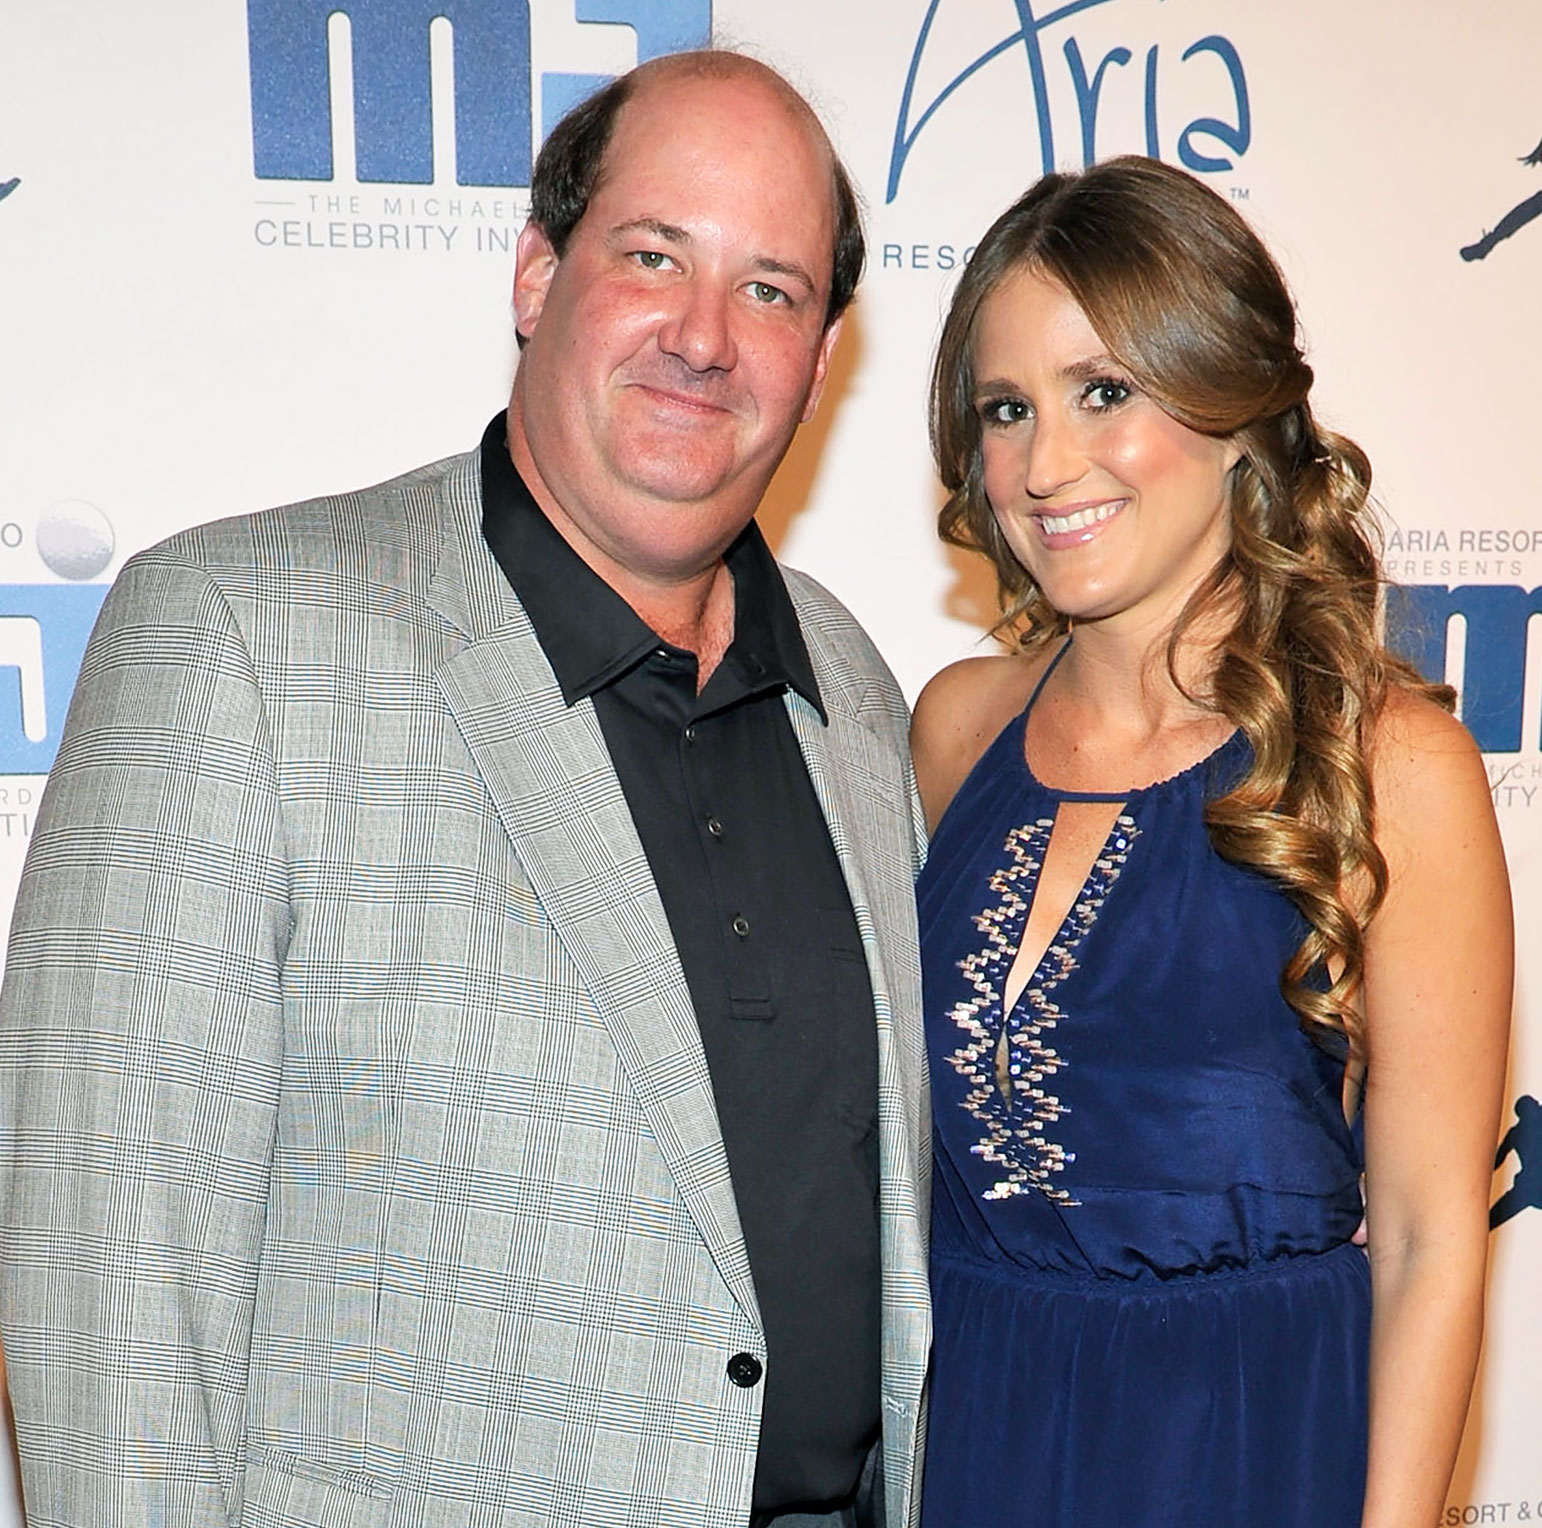 Brian Baumgartner Welcomes First Child With Wife: Baby Announcement